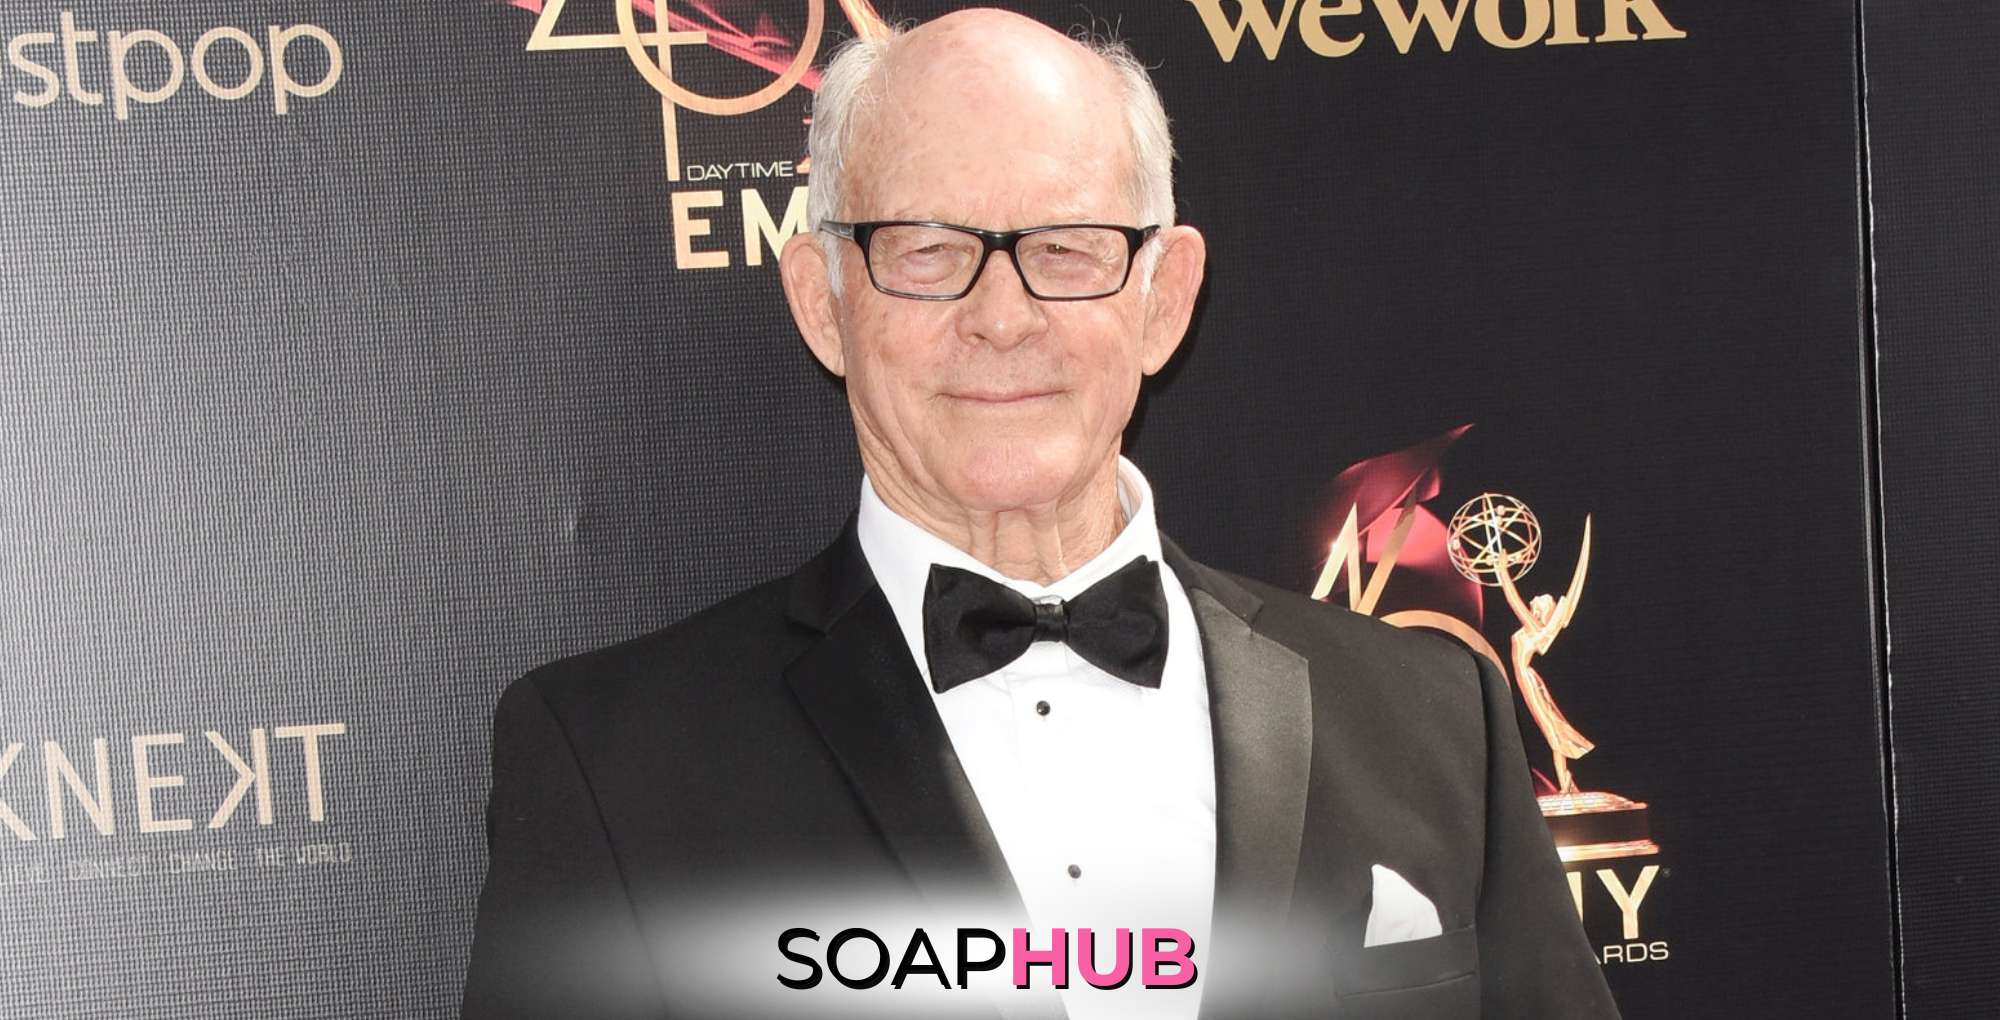 General Hospital star Max Gail with the Soap Hub logo across the bottom.